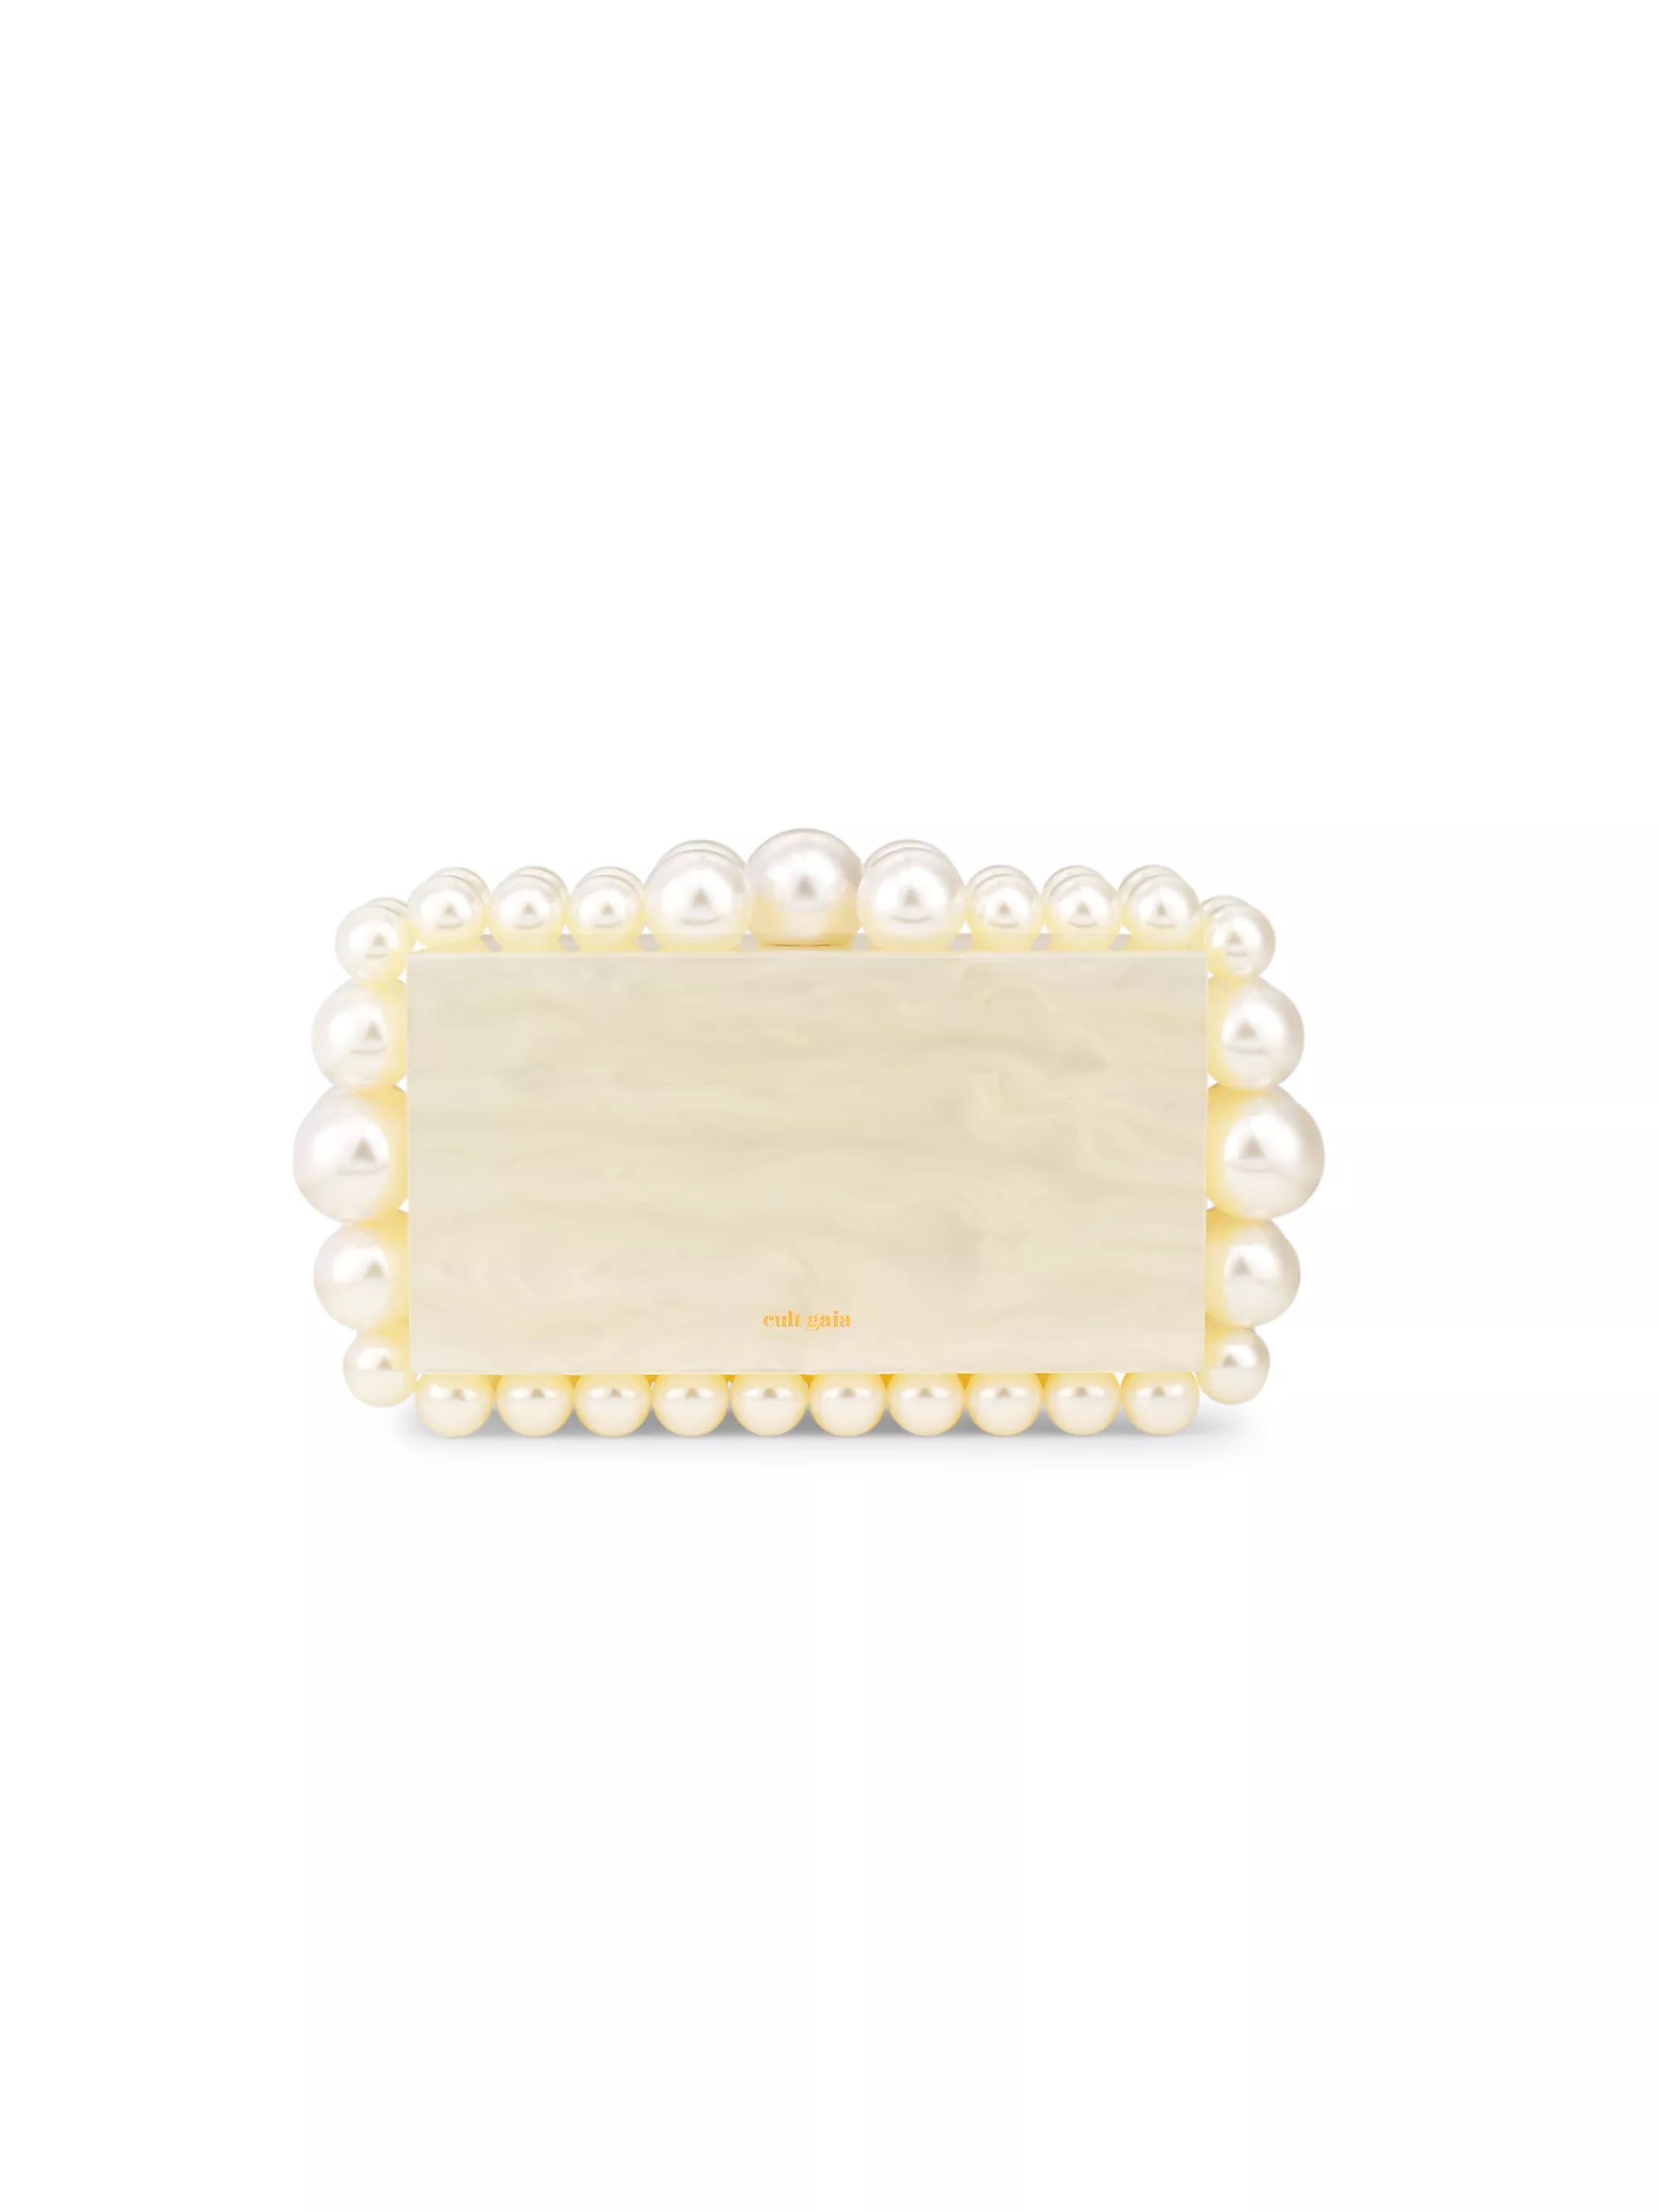 IvoryStyleIVORYPINKAll Clutches & PouchesCult GaiaEos Bauble Acrylic Box ClutchRating: 5 out of 5... | Saks Fifth Avenue